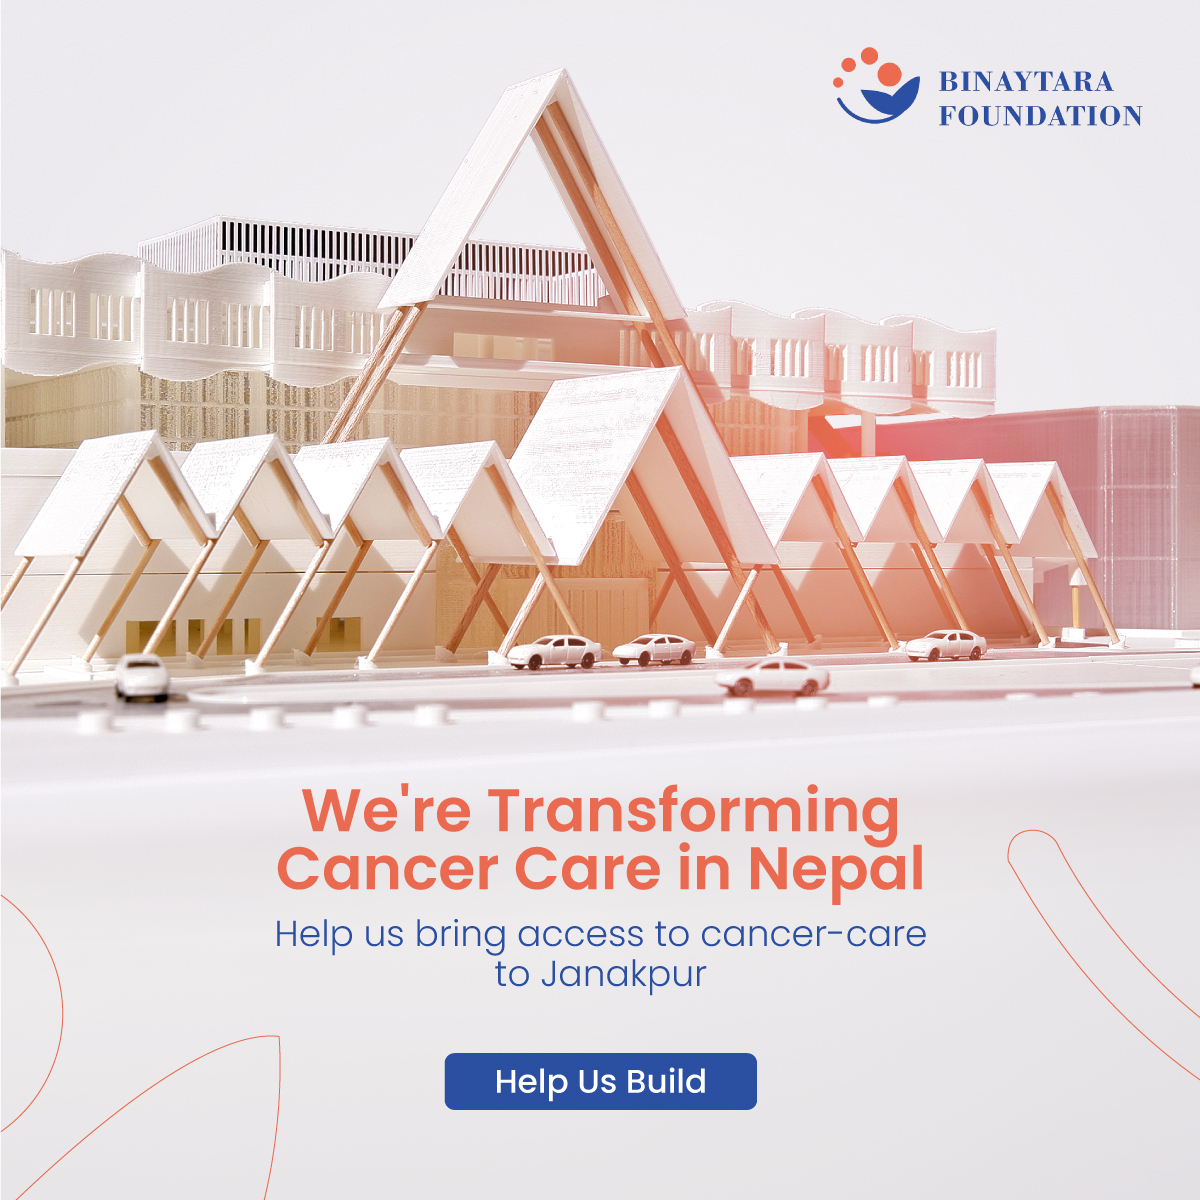 The Binaytara Foundation’s mission is to improve healthcare in resource-poor communities and improve cancer care worldwide. Help us serve cancer patients of the Madhesh Province and the neighboring states of Nepal and state of Bihar of India. Learn more here 🌐